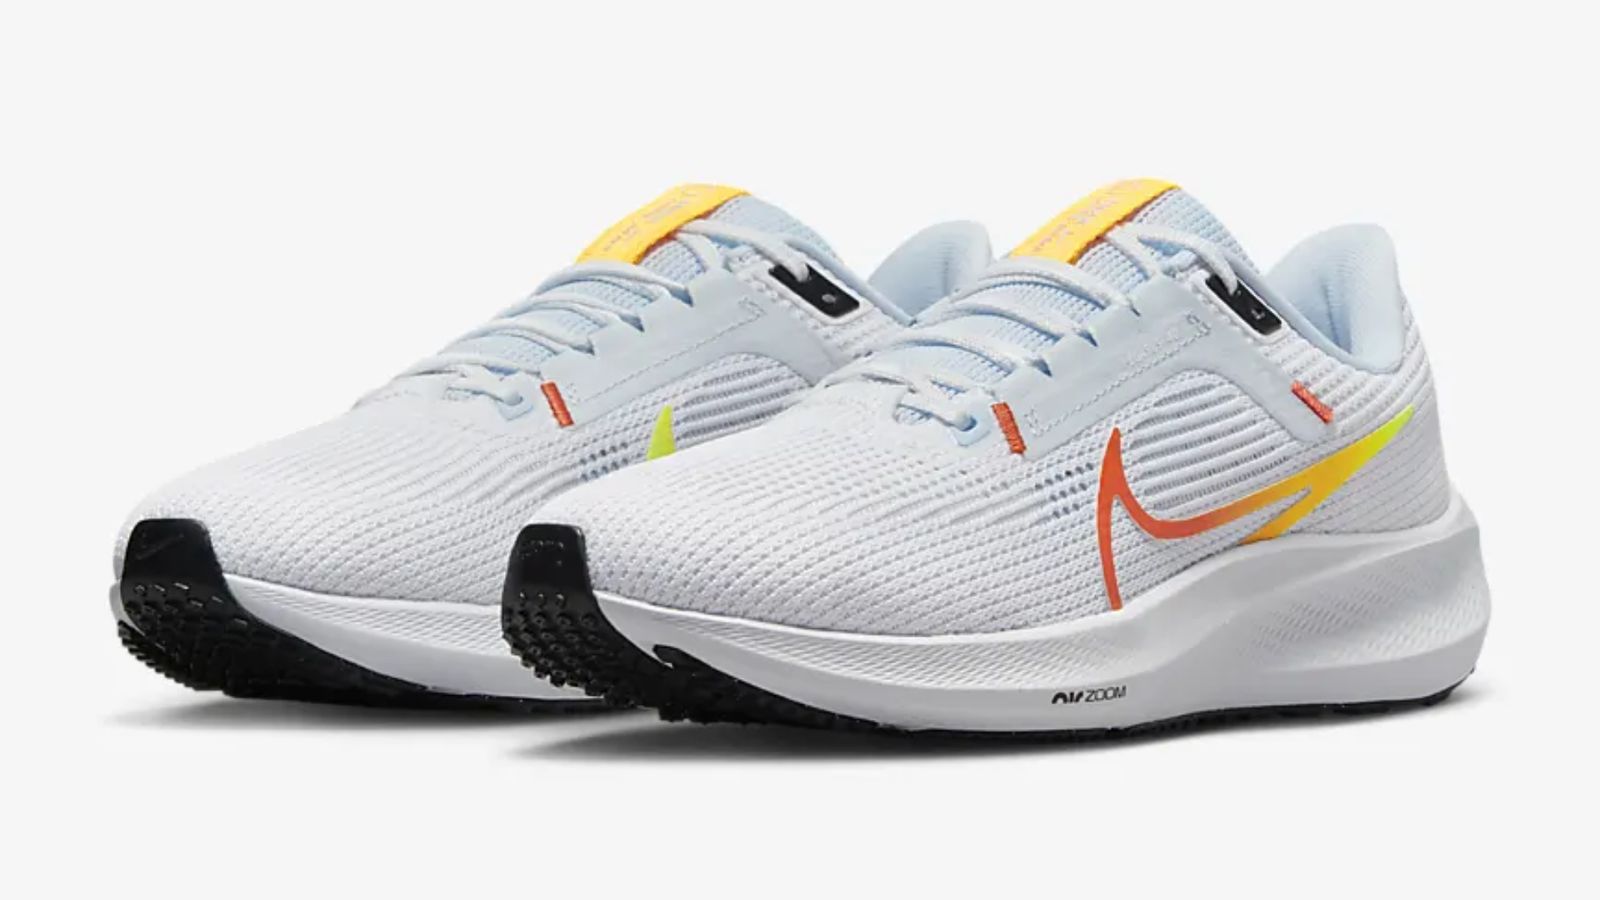 Nike Pegasus 40 product image of white running shoes featuring yellow and orange Swooshes.